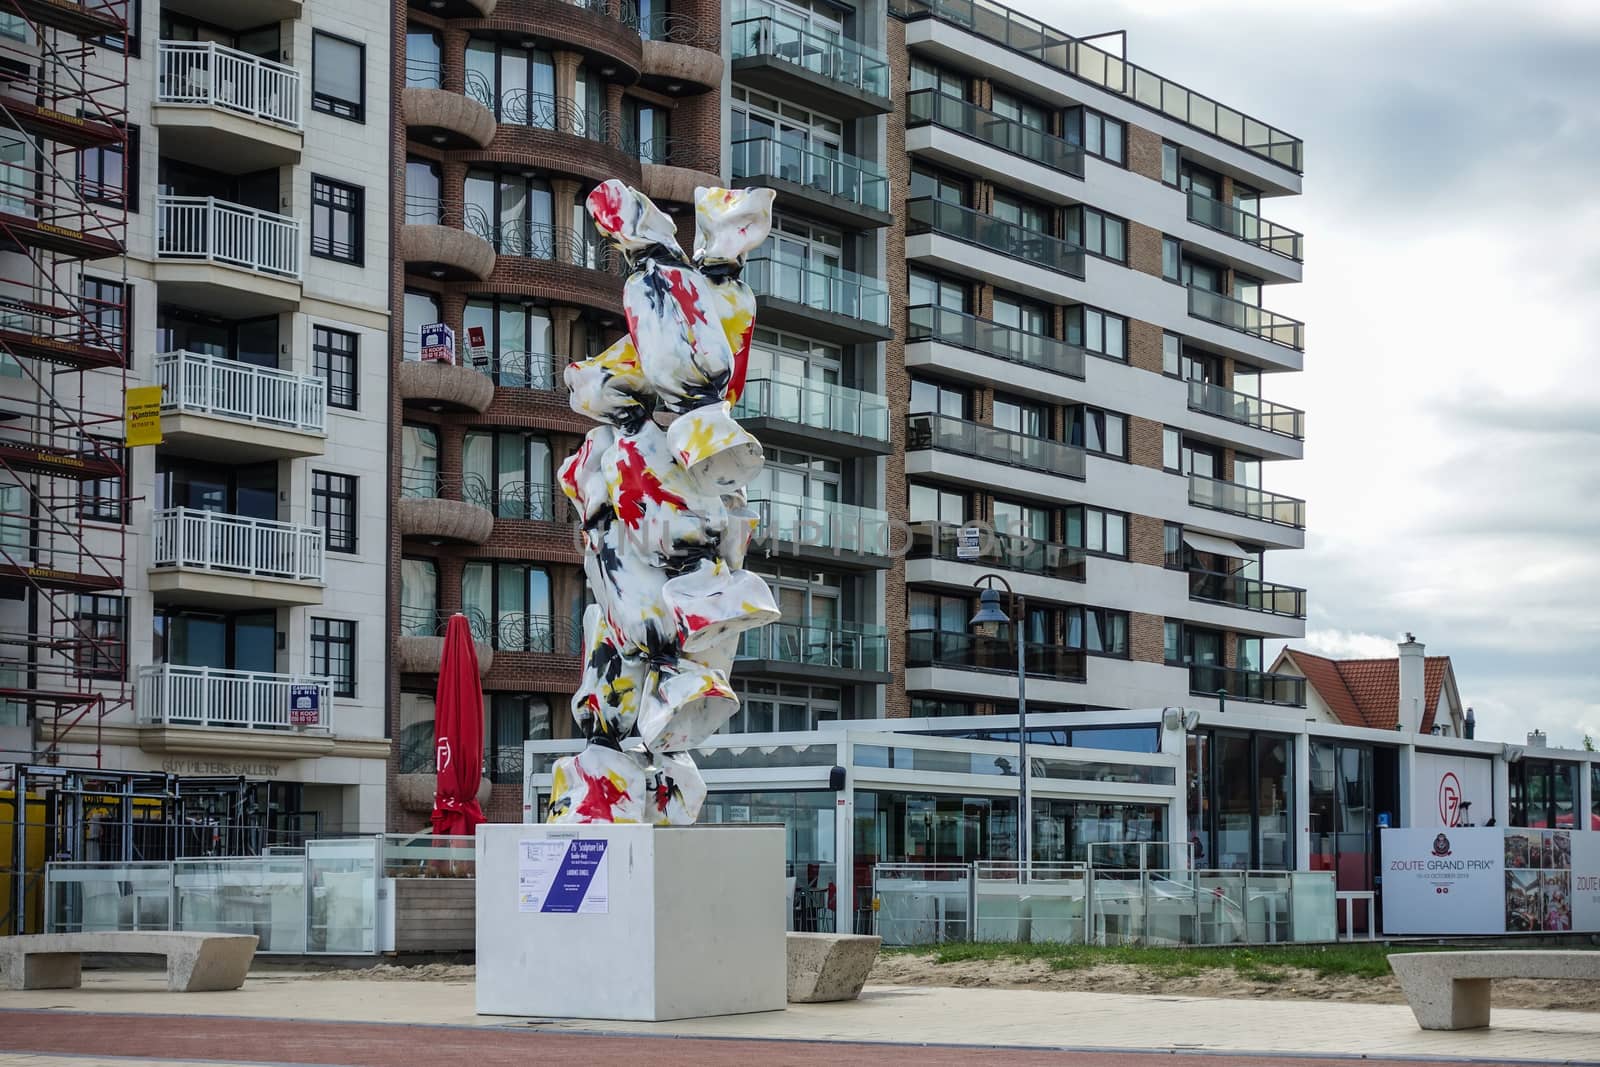 Knokke-Heist, Flanders, Belgium -  June 16, 2019: Knokke-Zoute part of town. Statue of six wrapped candy standing on pedestal with apartment buildings as backdrop. Belgian flag colors.